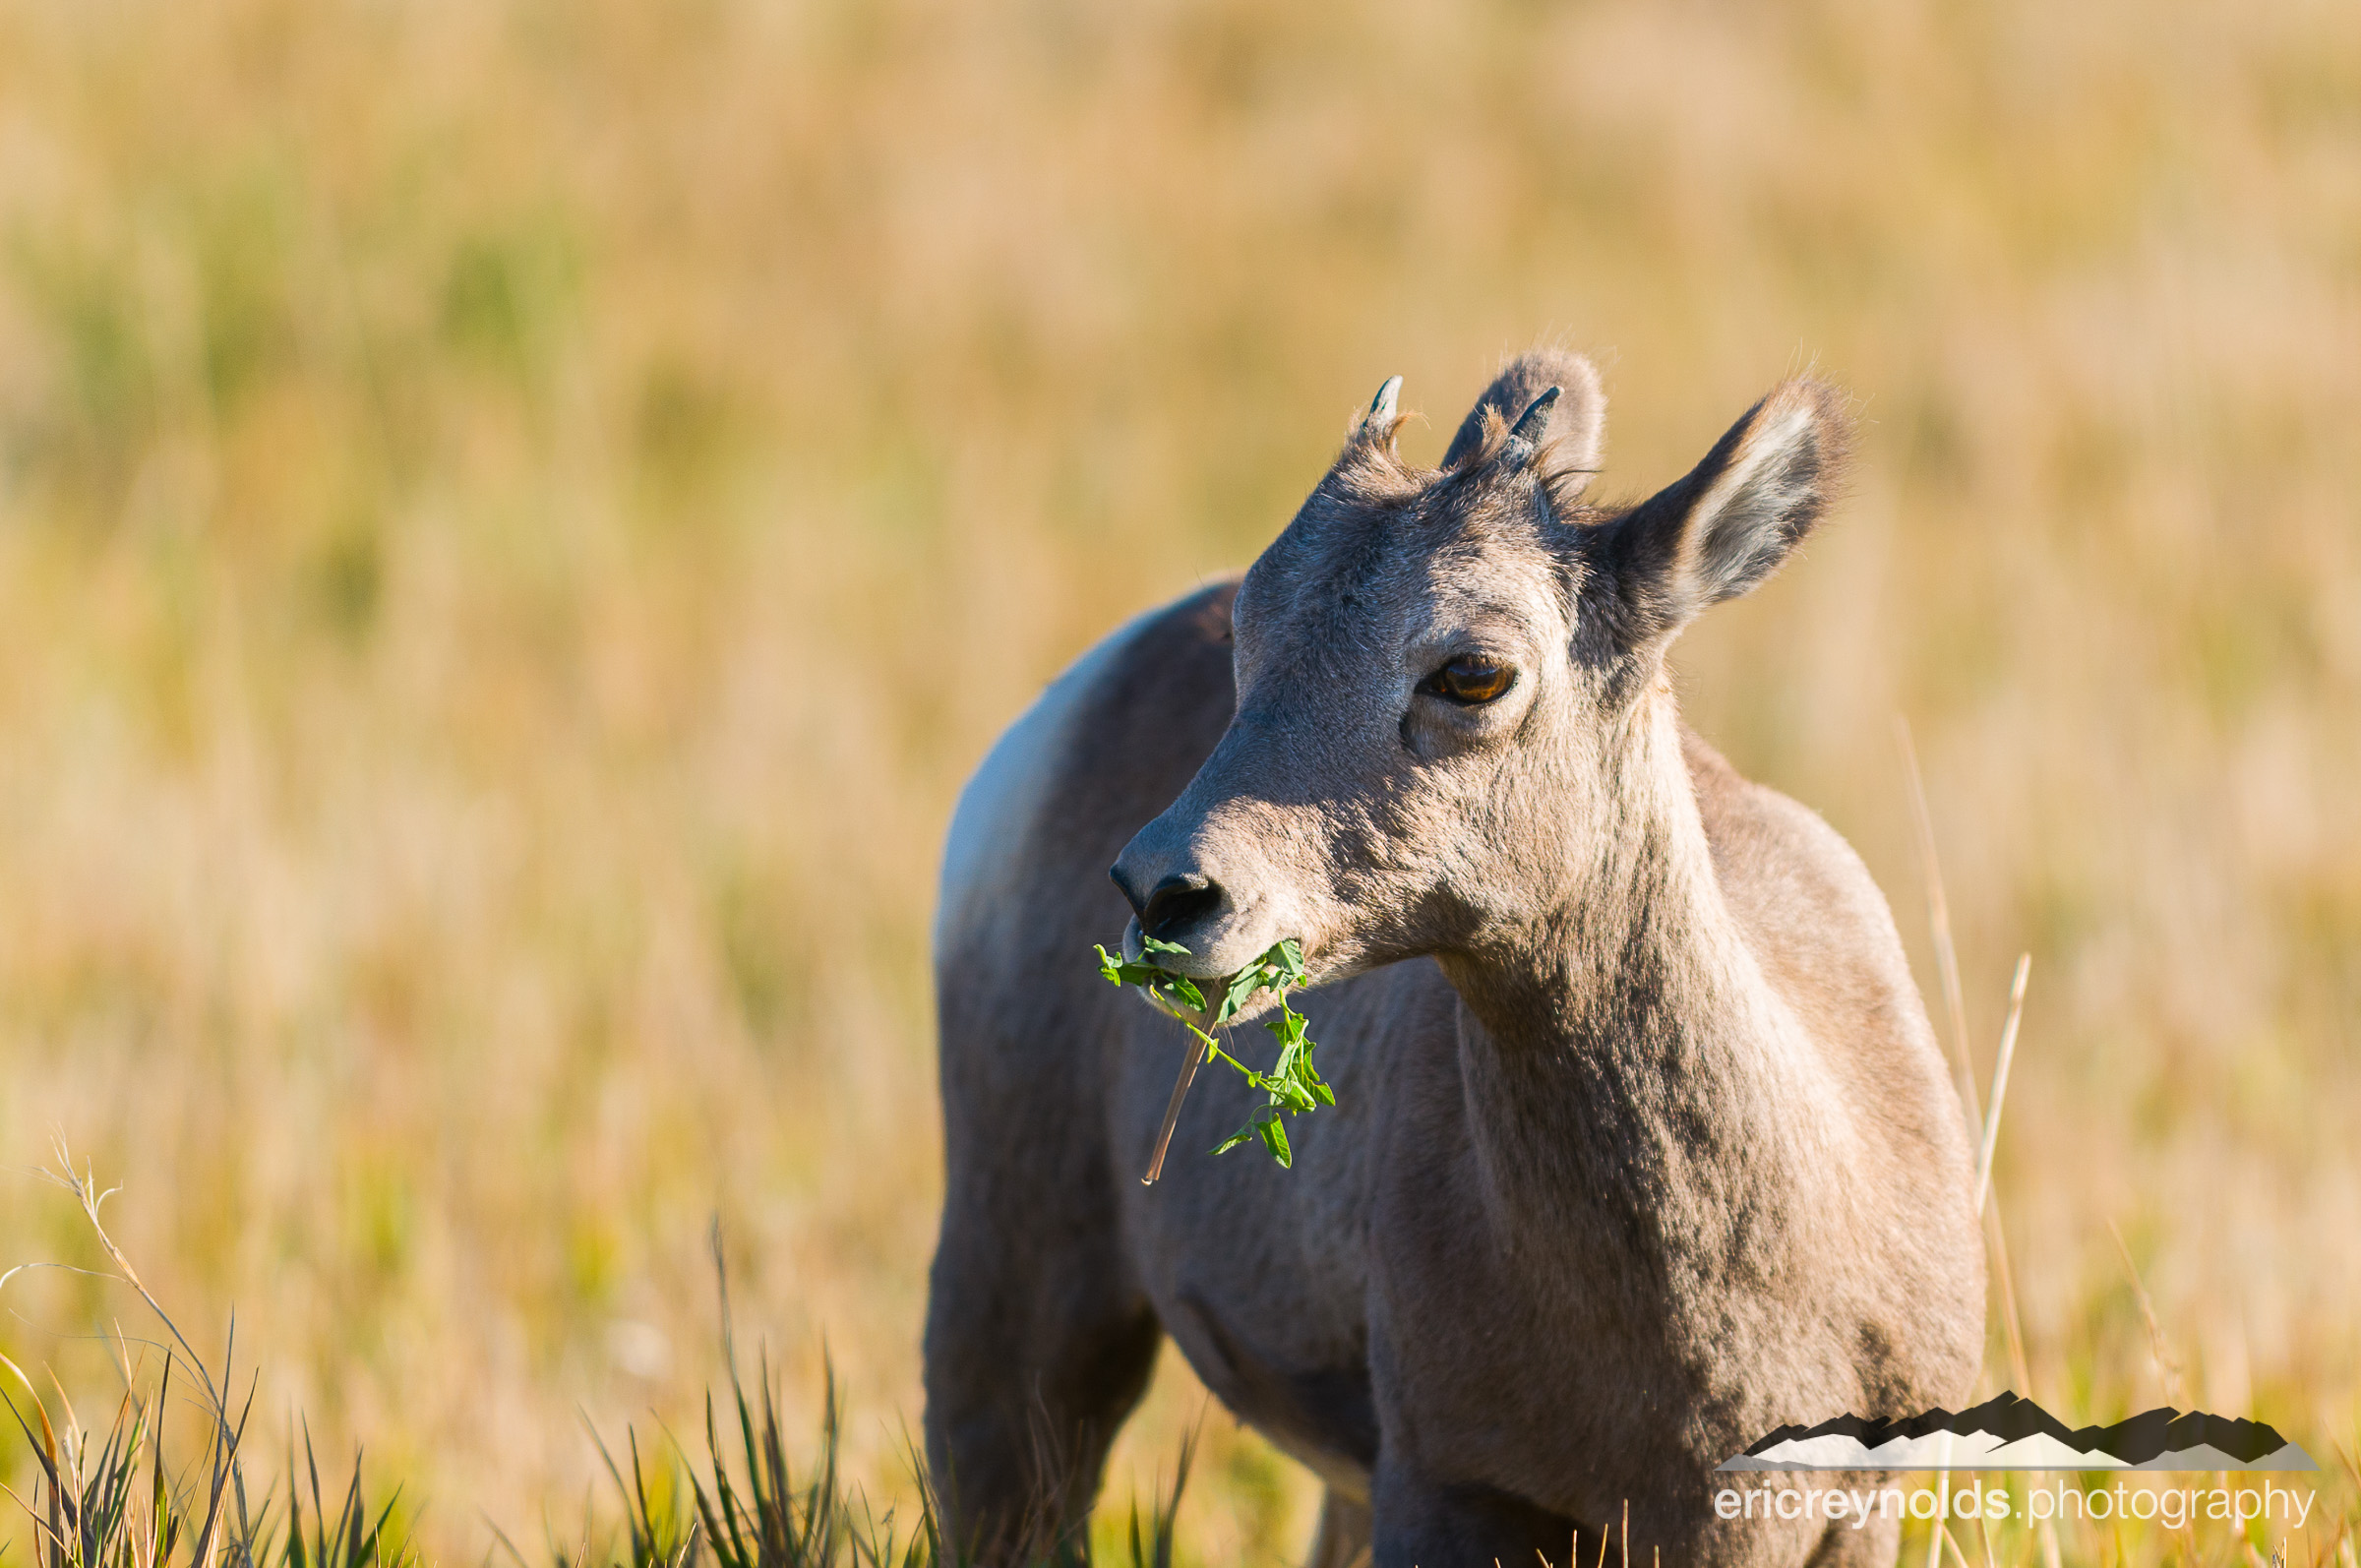 Eating His Greens by Eric Reynolds - Landscape Photographer